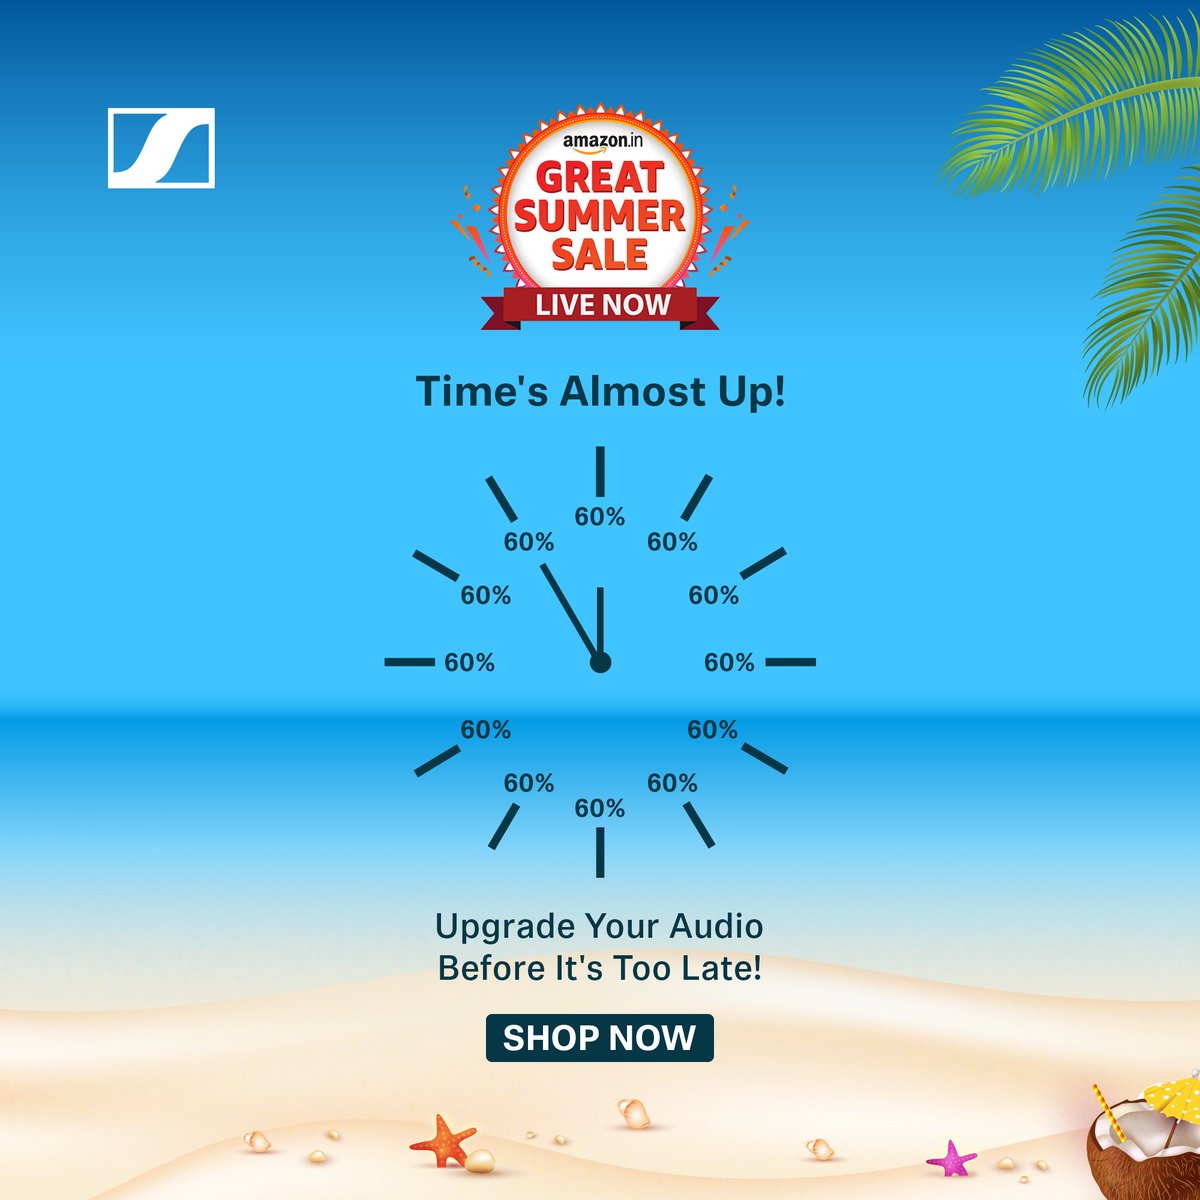 Few Hours To Go! You better be fast because tomorrow it will be gone! Up to 60% off on your favourite audio essentials. Shop Now!

@amazonIN #GreatSummerSale #Discounts #Shopping #SennheiserIndia #Sennheiser #Explore #FYP